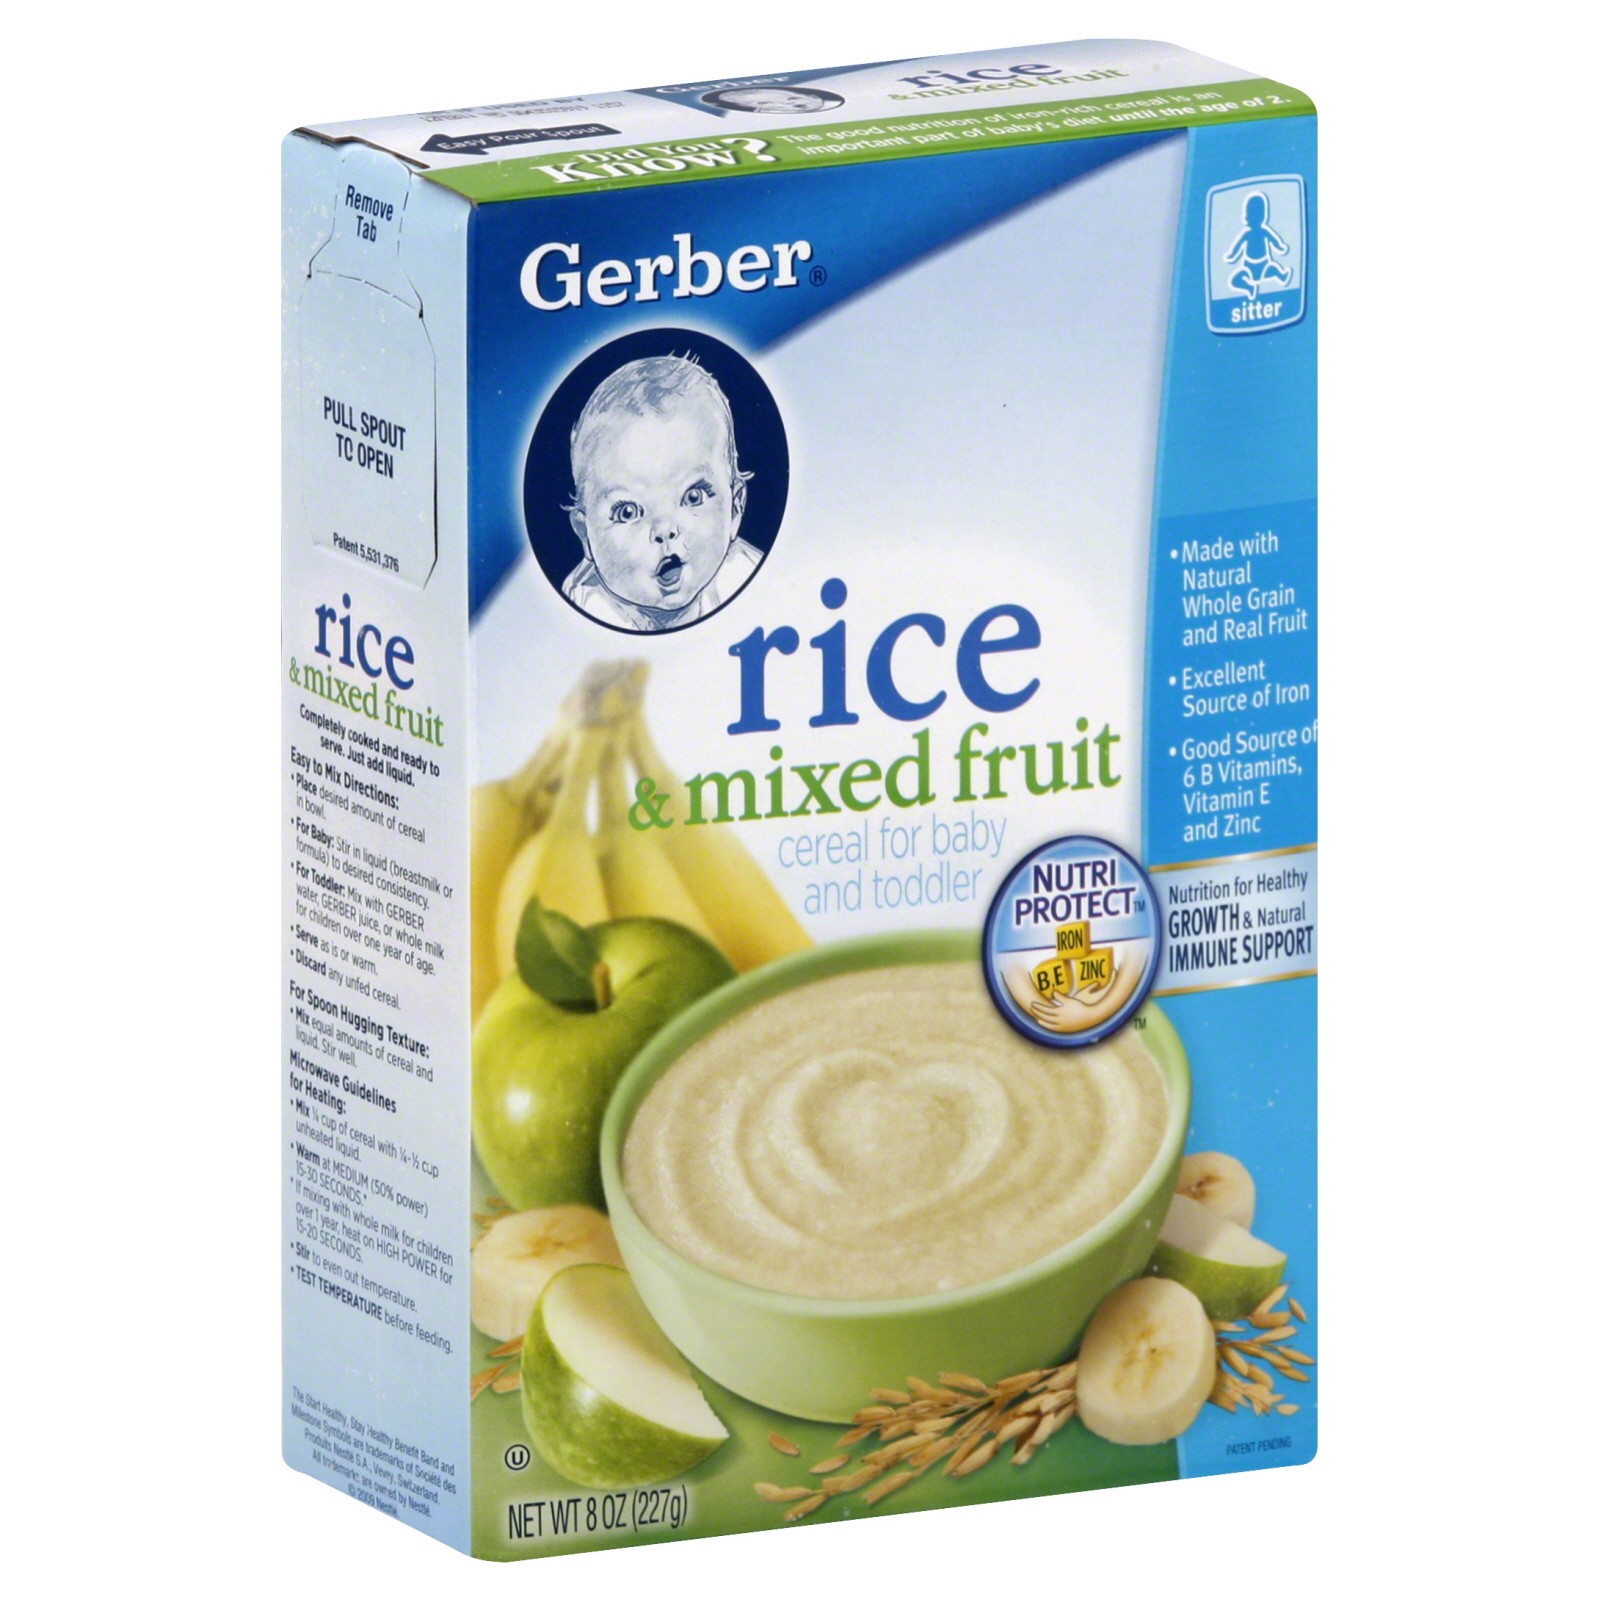 Gerber Cereal for Baby and Toddler, Rice & Mixed Fruit, 8 oz (227 g)